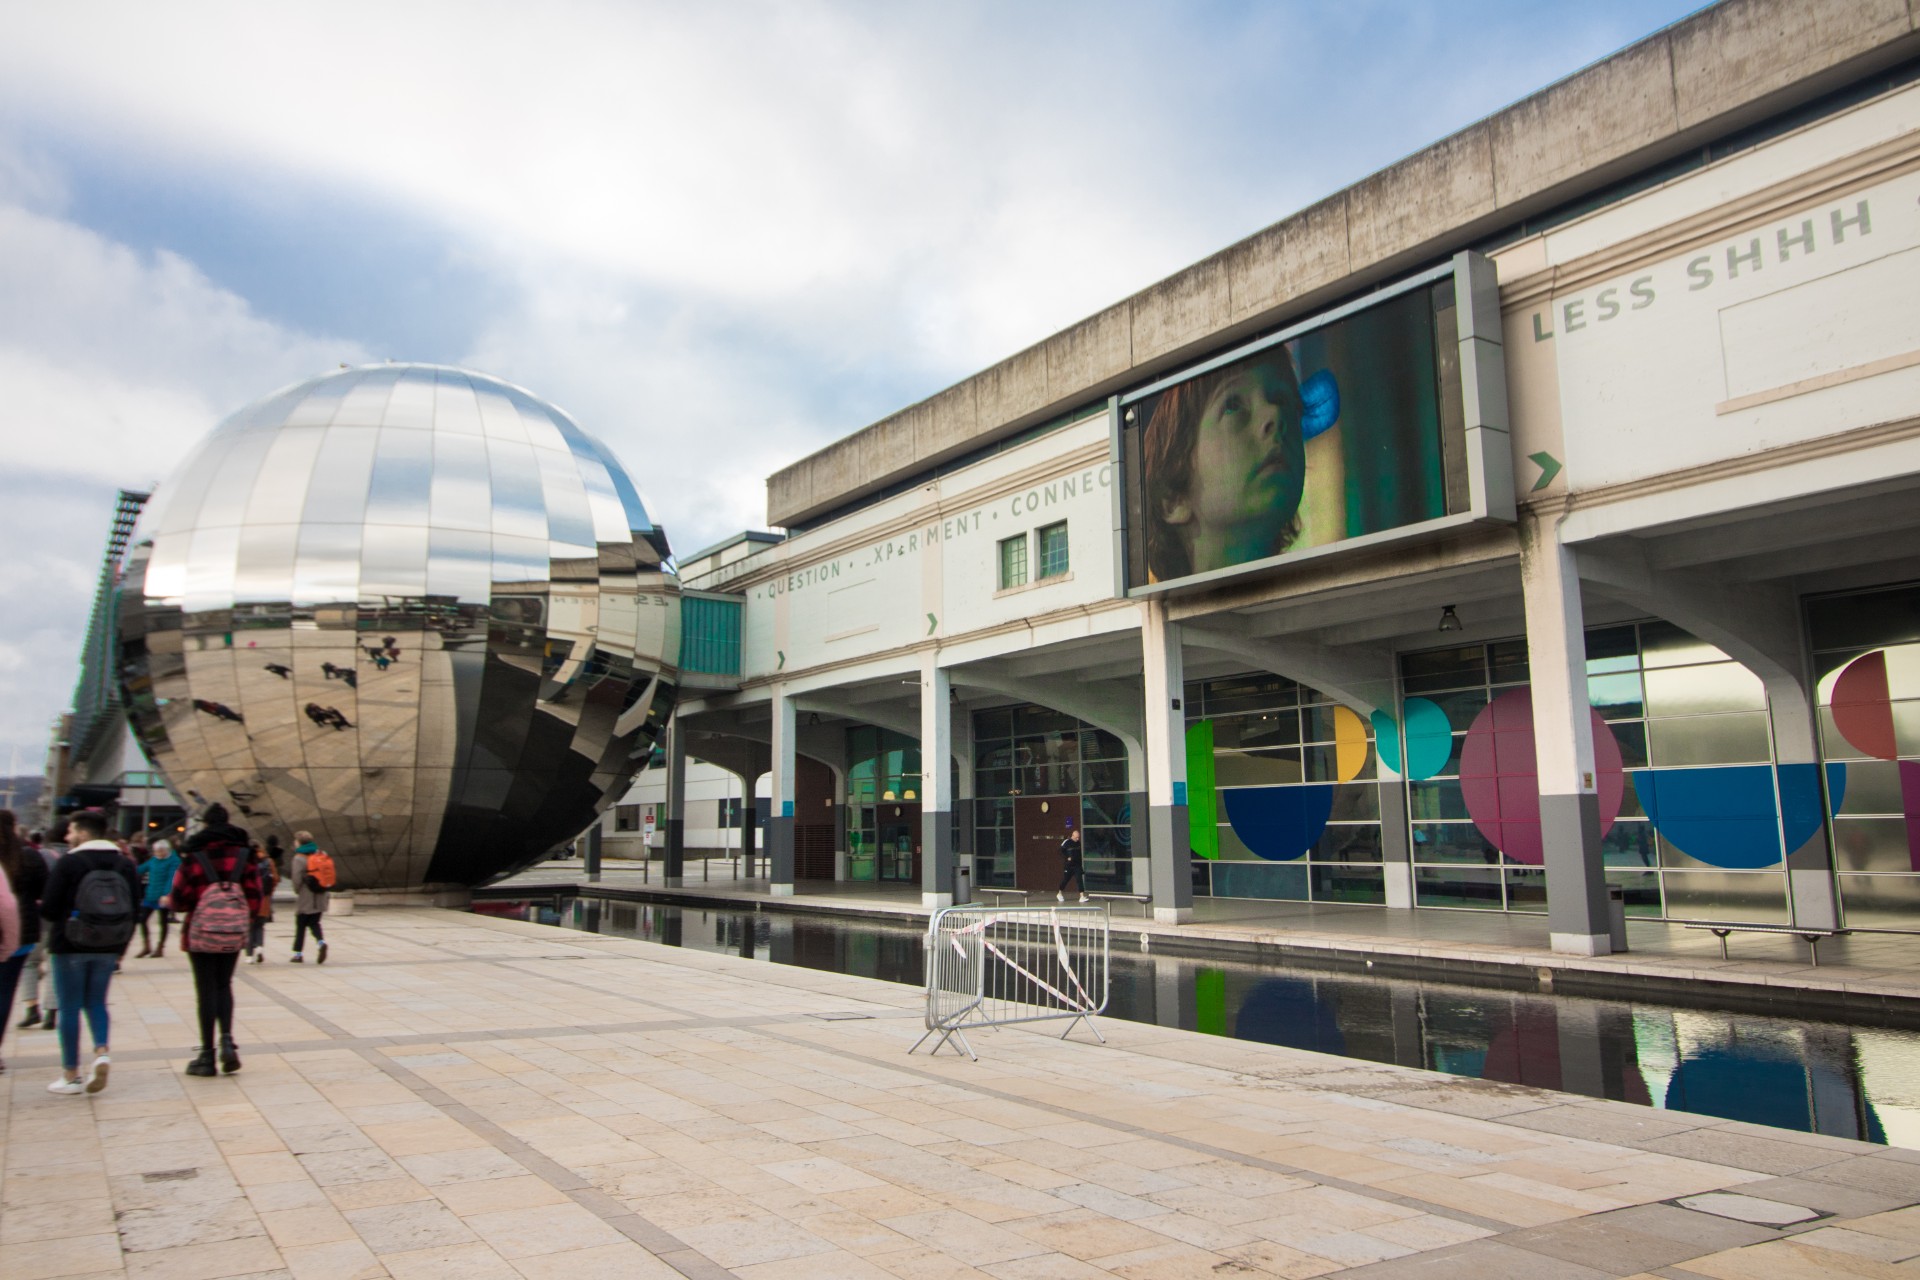 Millennium Square Bristol. We the Curious Science Centre. Planetarium. Huge mirrored ball in square. How to Spend the Perfect Day on Bristol Harbourside. What to do on Bristol Harbourside. Bristol UK. Bristol England. Things to do on Bristol Harbourside. Bristol travel guide. Bristol travel tips. Bristol travel blog. What to do in Bristol. What to see in Bristol. Things to do in Bristol. Things to see in Bristol. How to spend a day in Bristol.